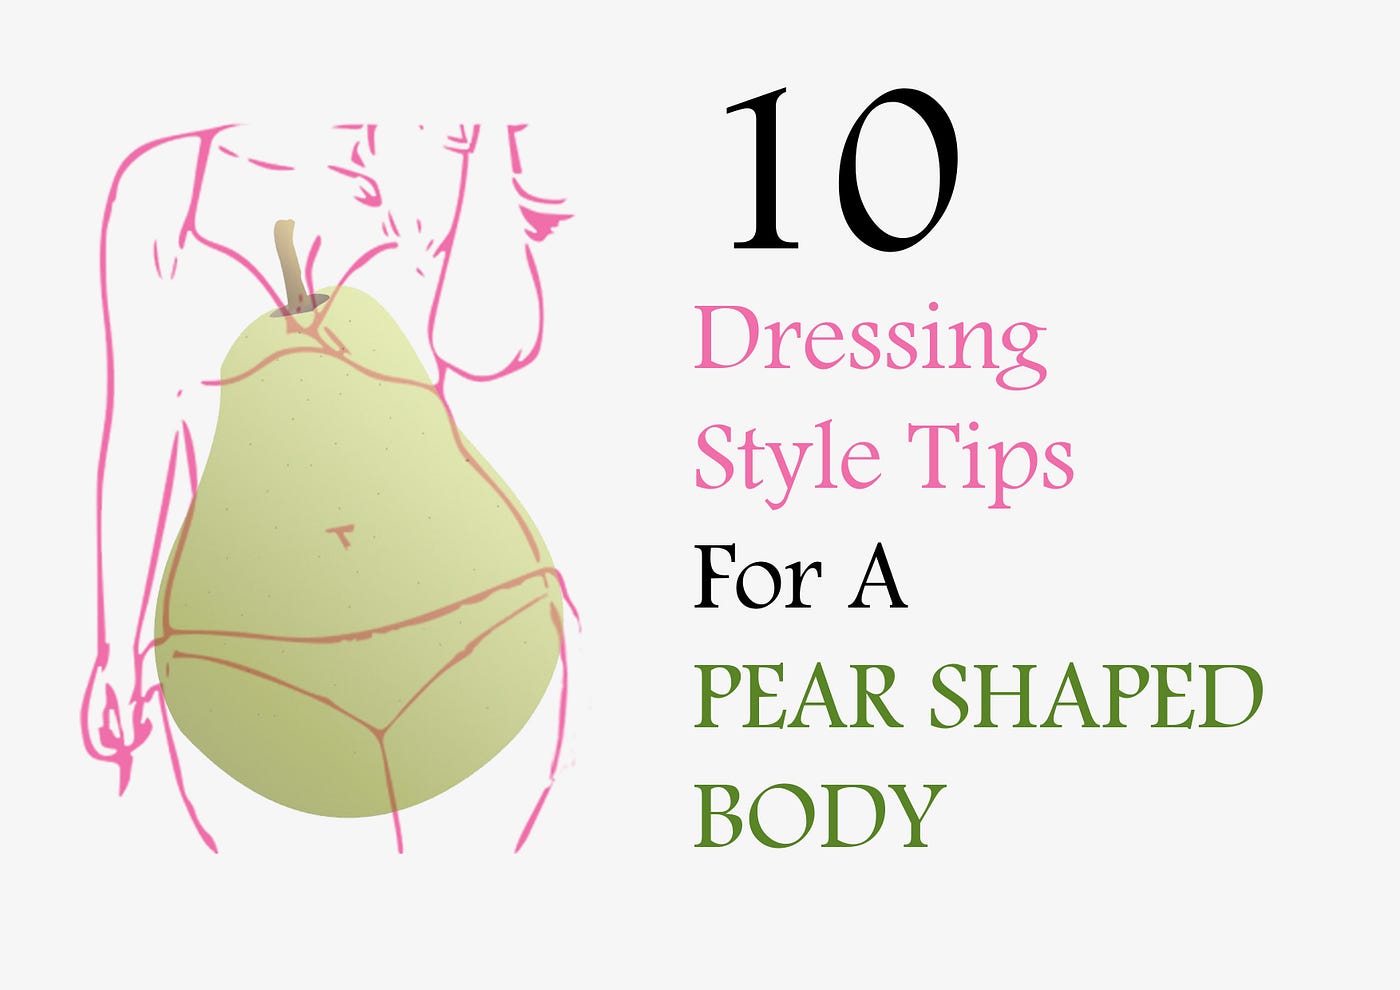 10 Dressing Style Tips For a Pear Shaped Body, by Selekt